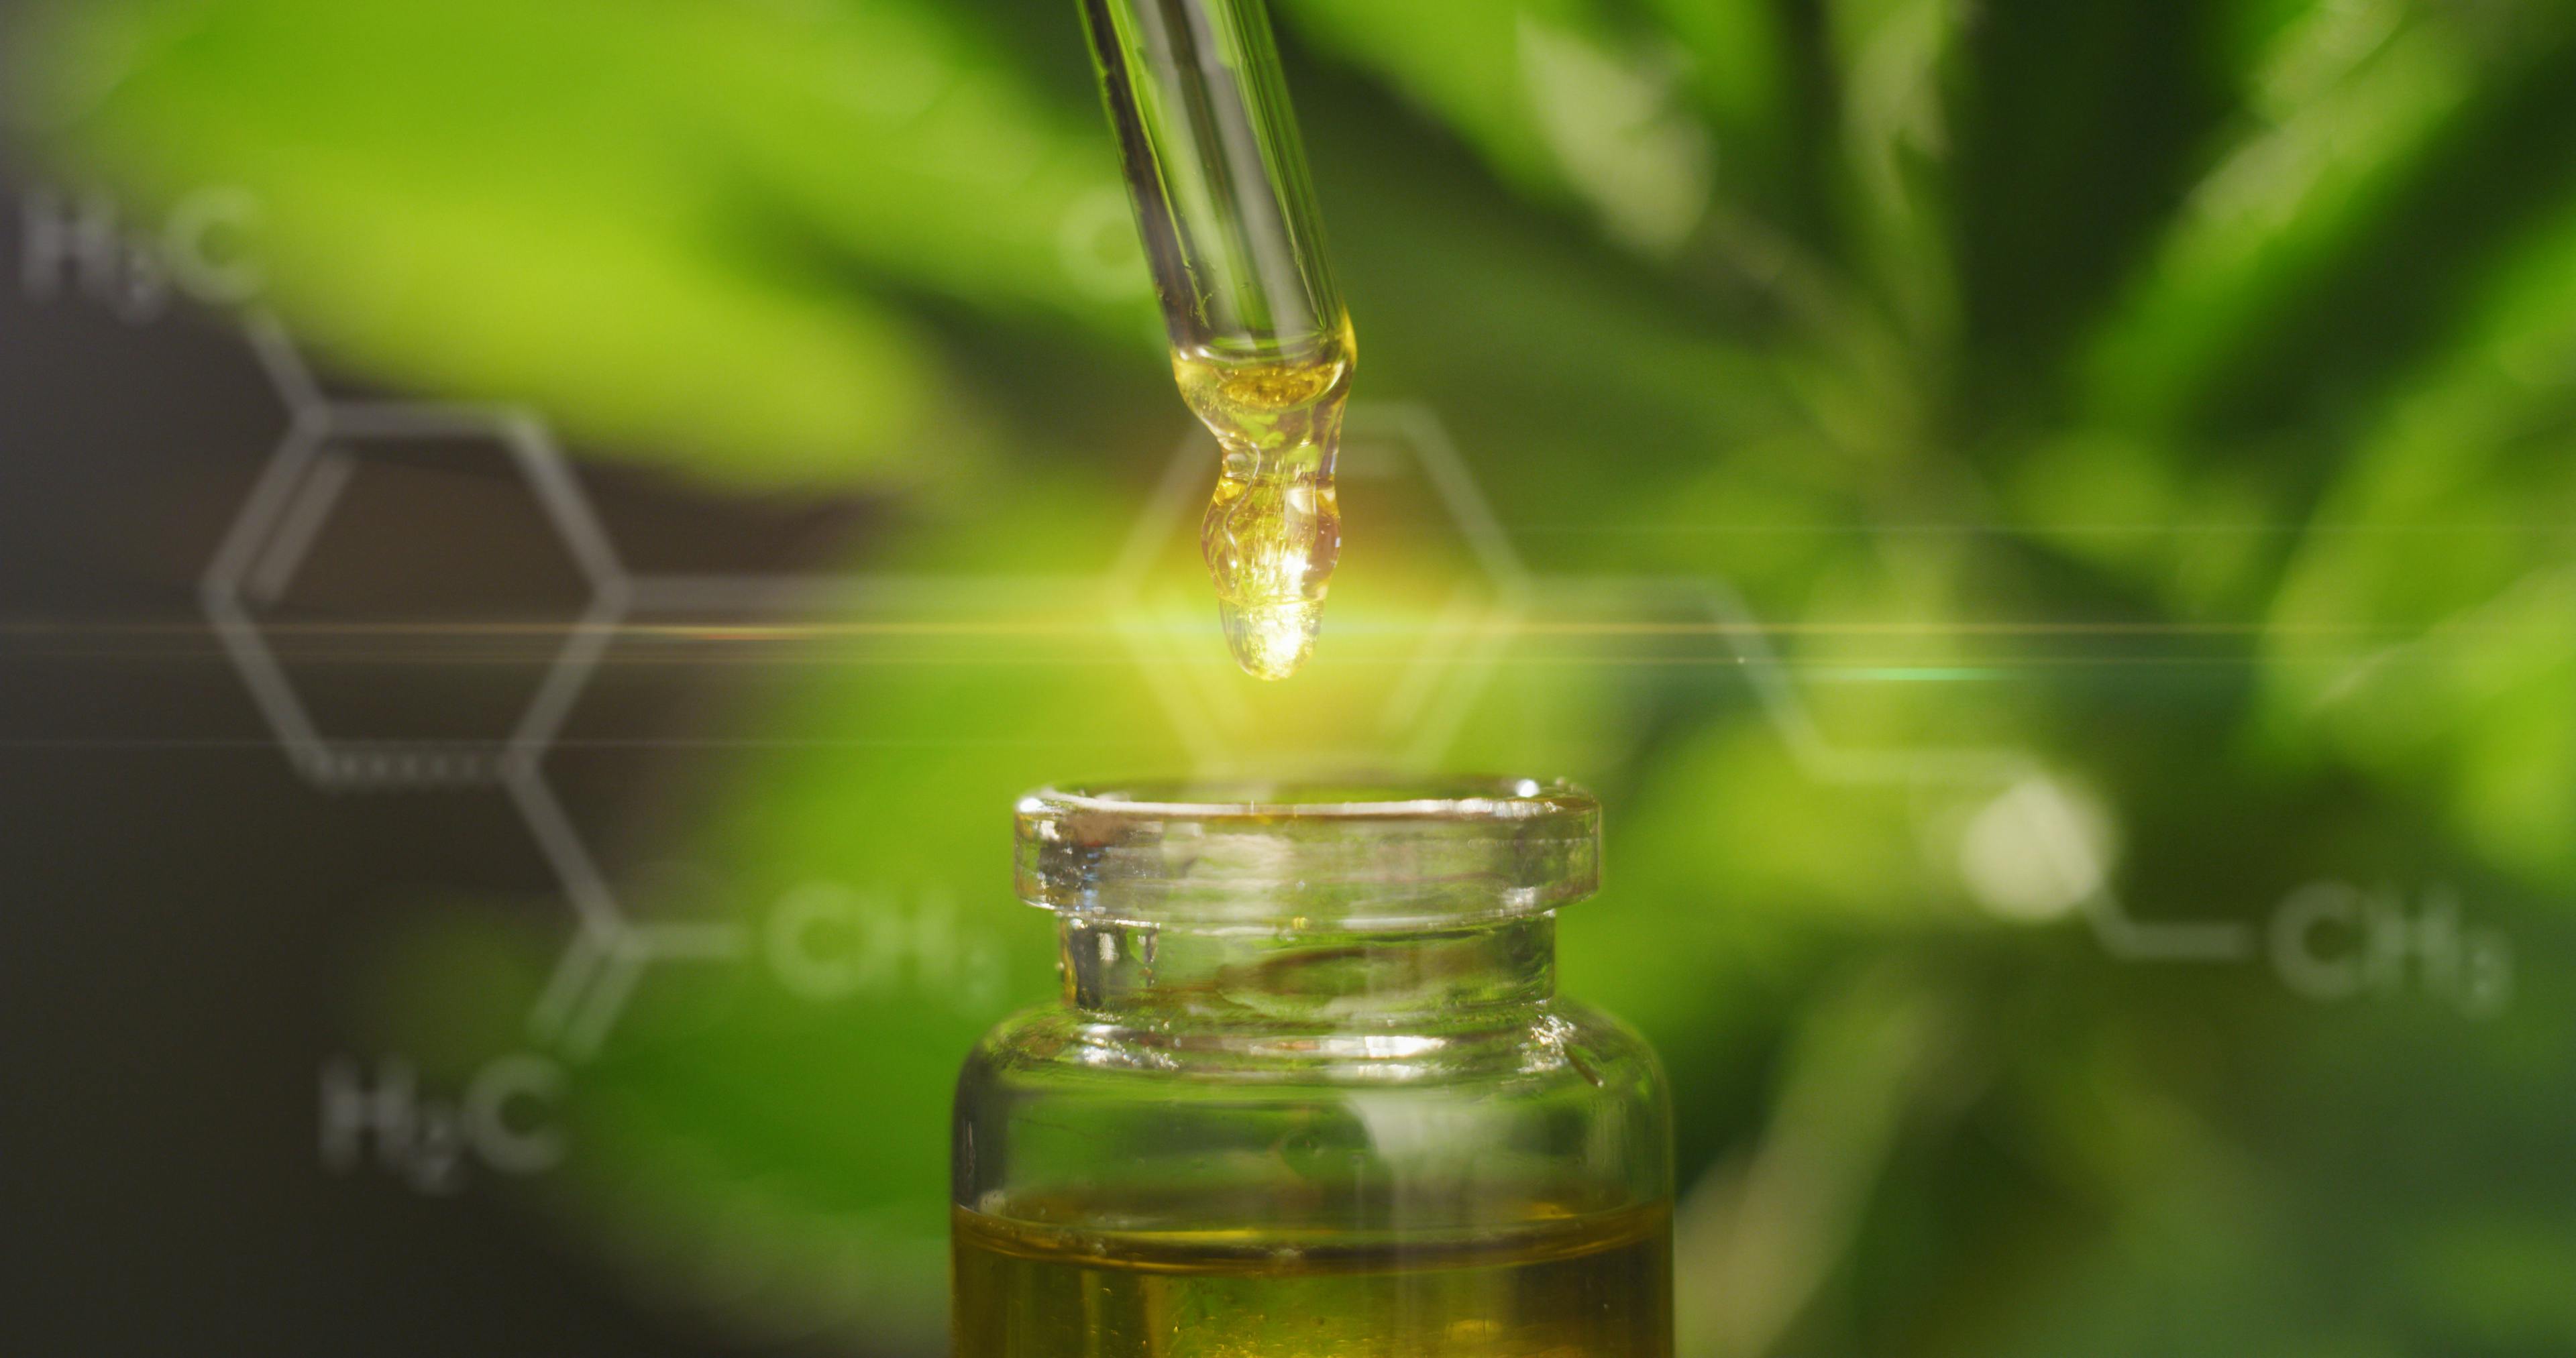 FDA: CBD Requires Separate Regulatory Pathway from Dietary Supplements, Food